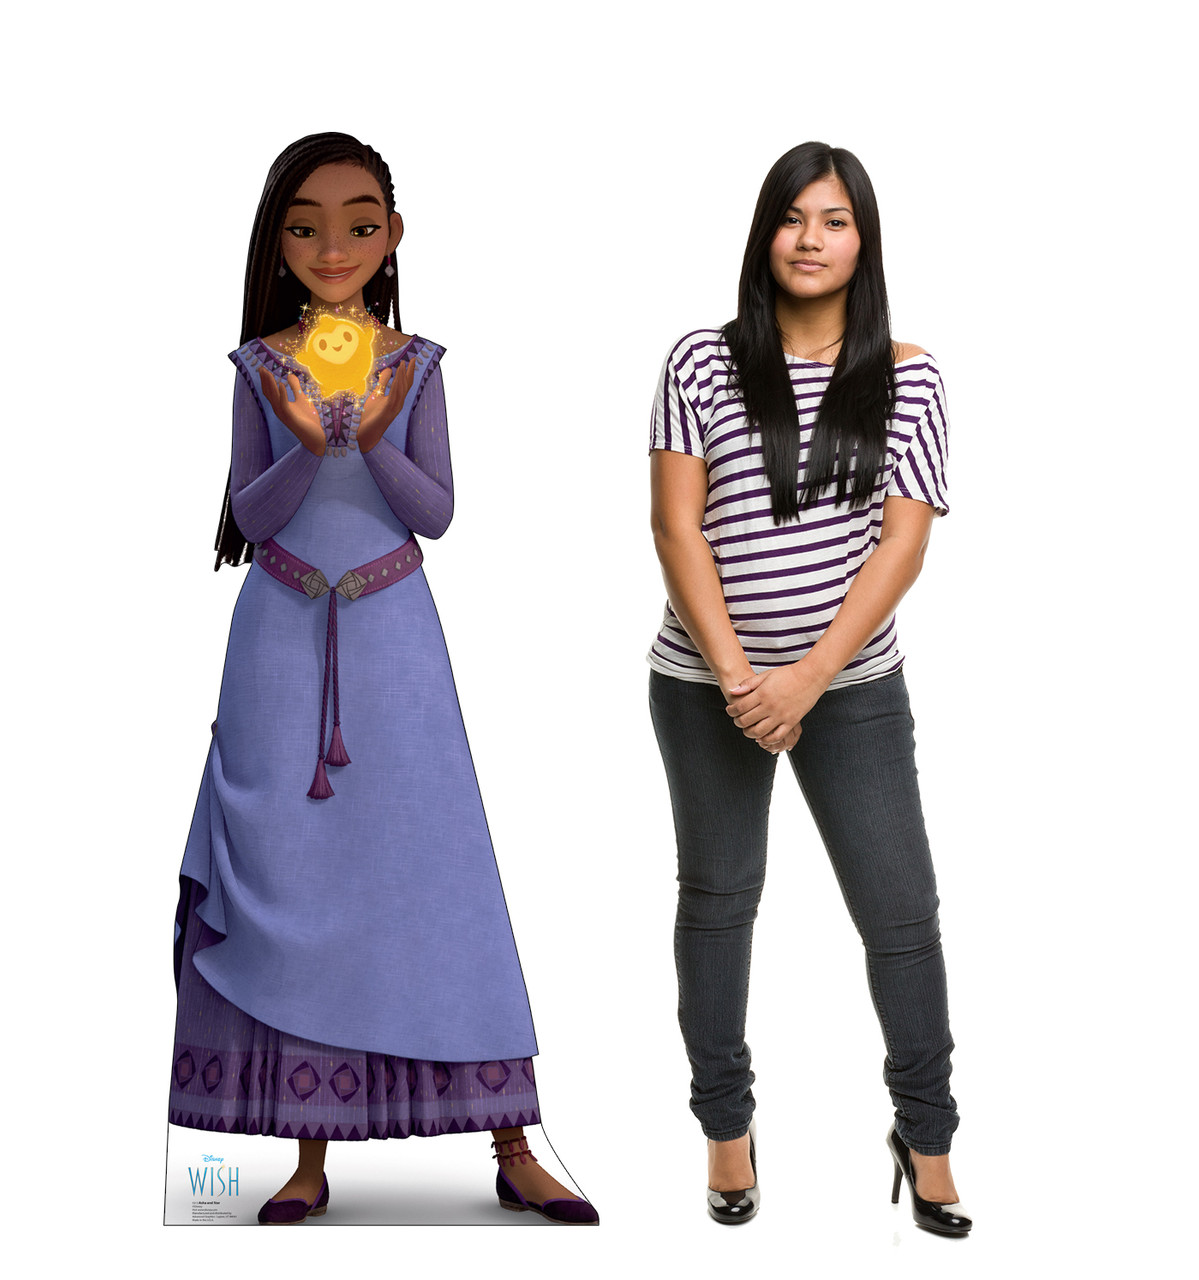 Life-size cardboard standee of Asha and Star with model.